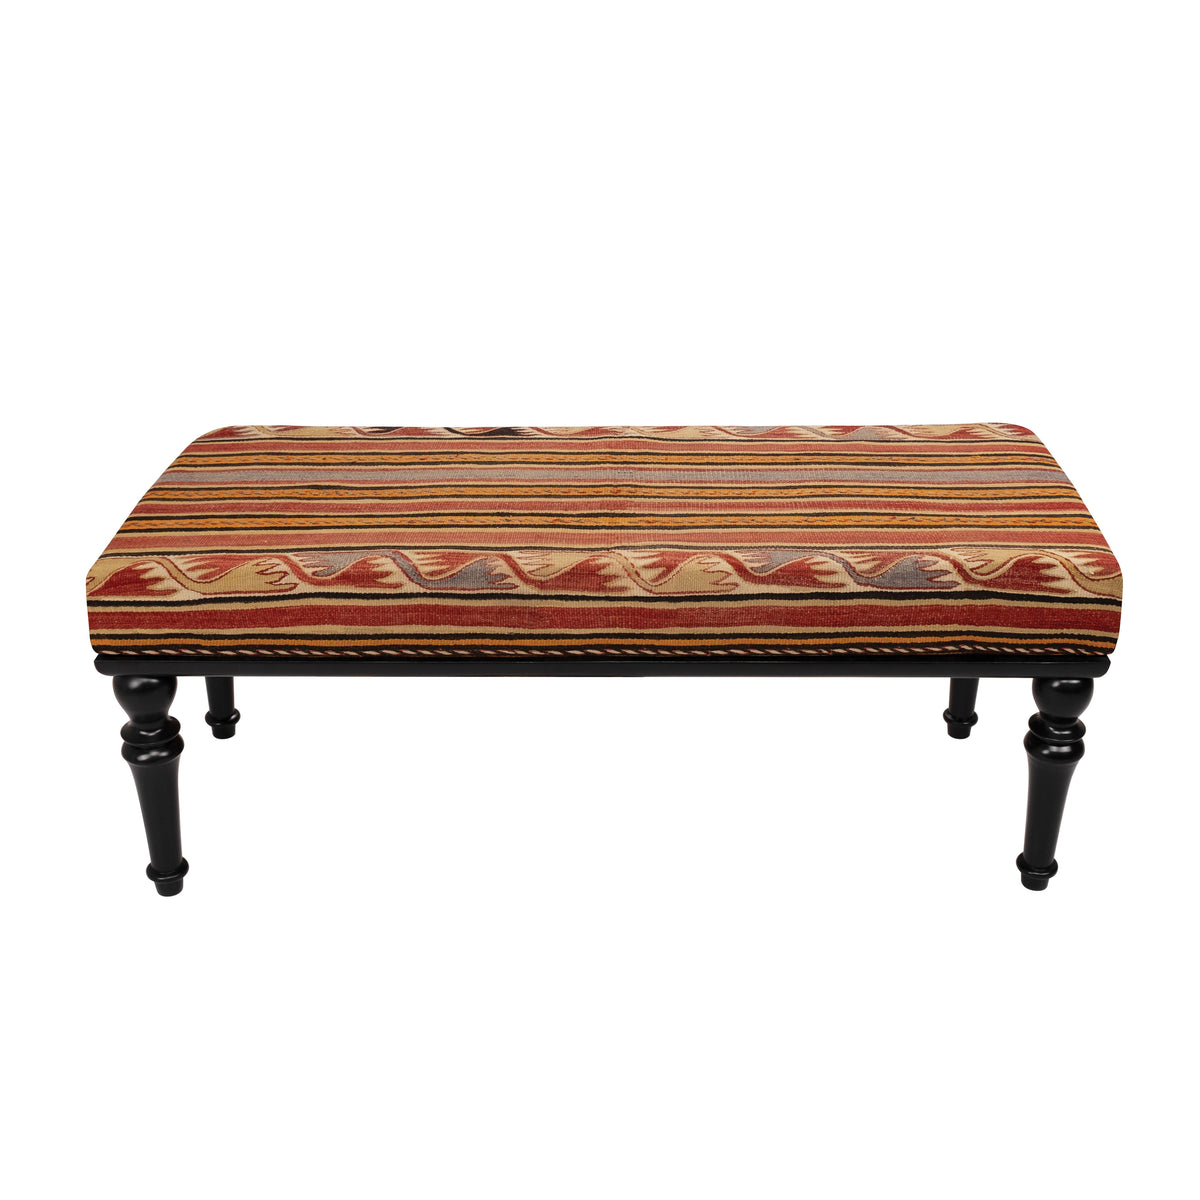 Vintage Kilim Upholstered Dining - Entryway Wooden Benches